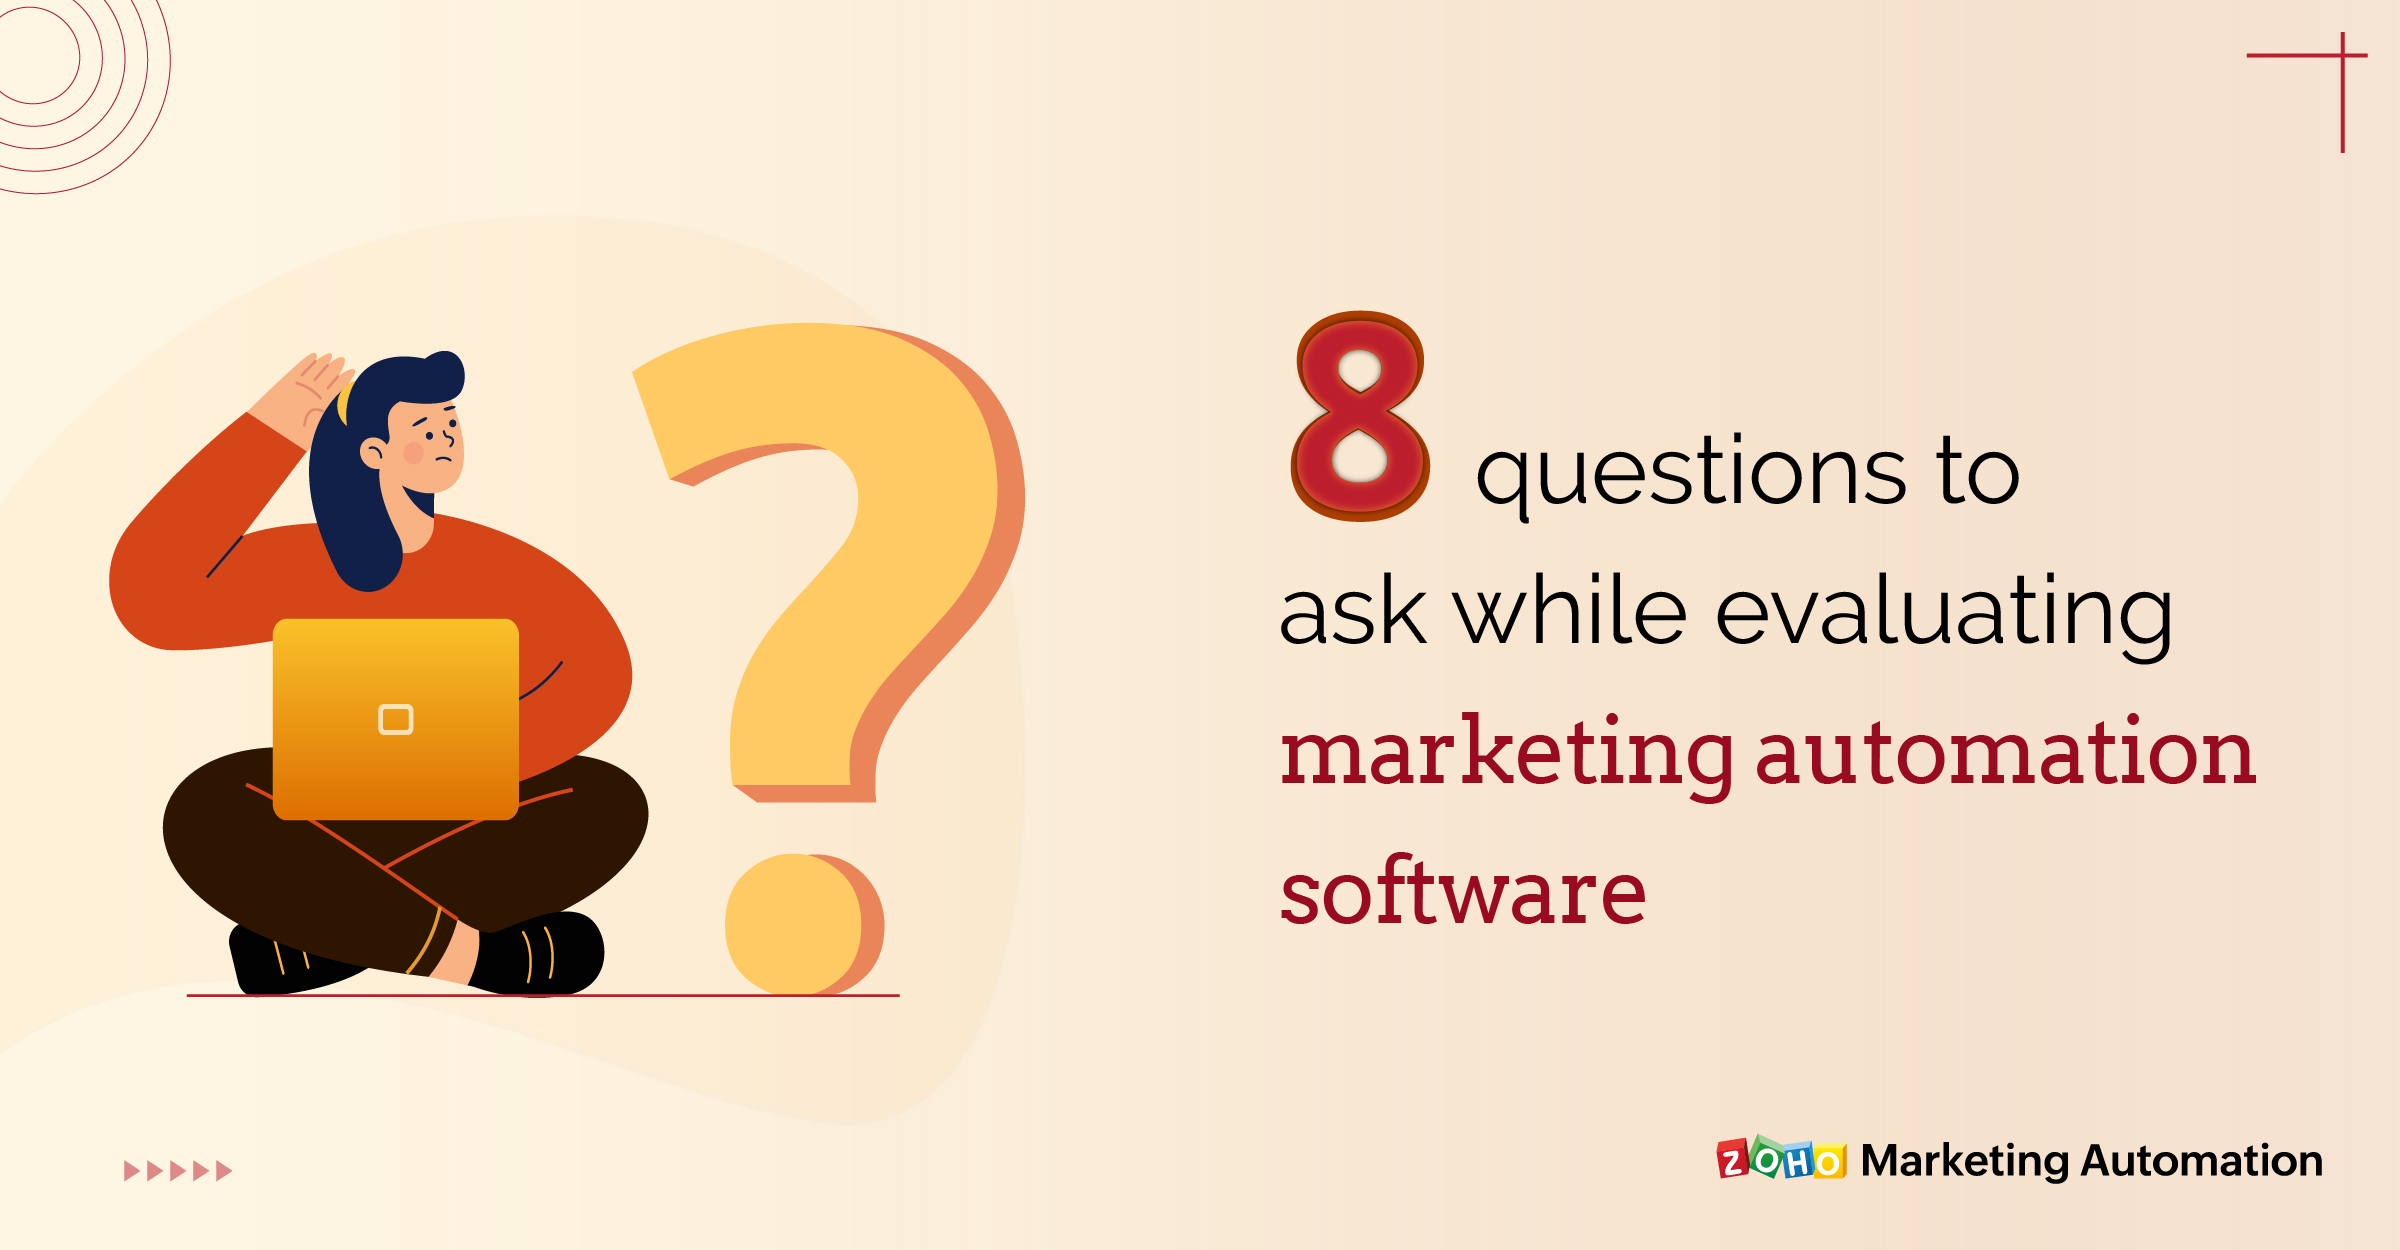 8 questions to ask while evaluating marketing automation software